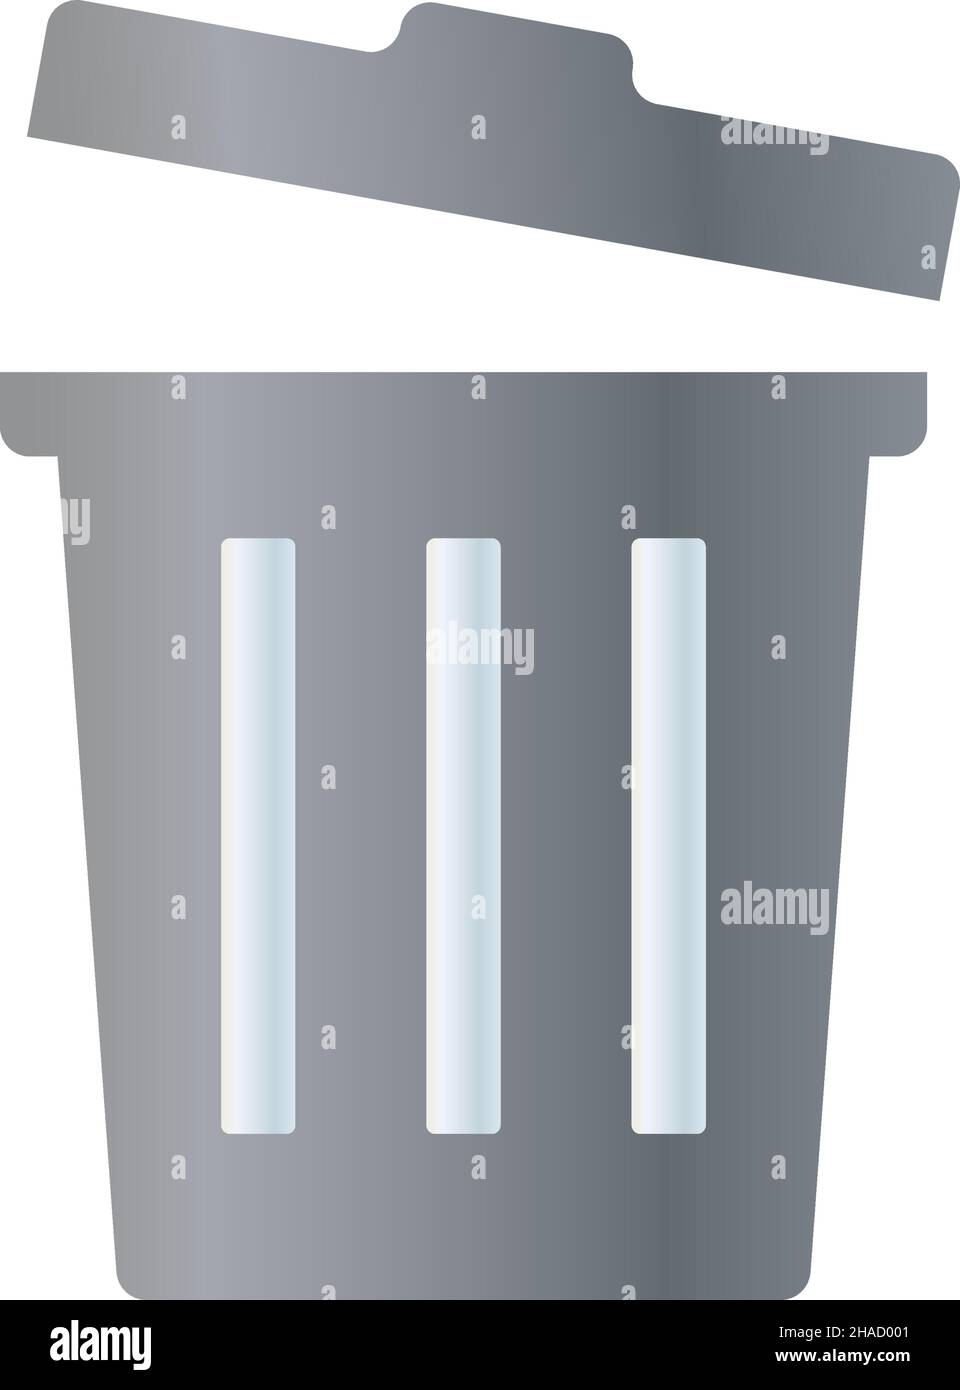 Simple icon that expresses dumping and so on. Stock Vector